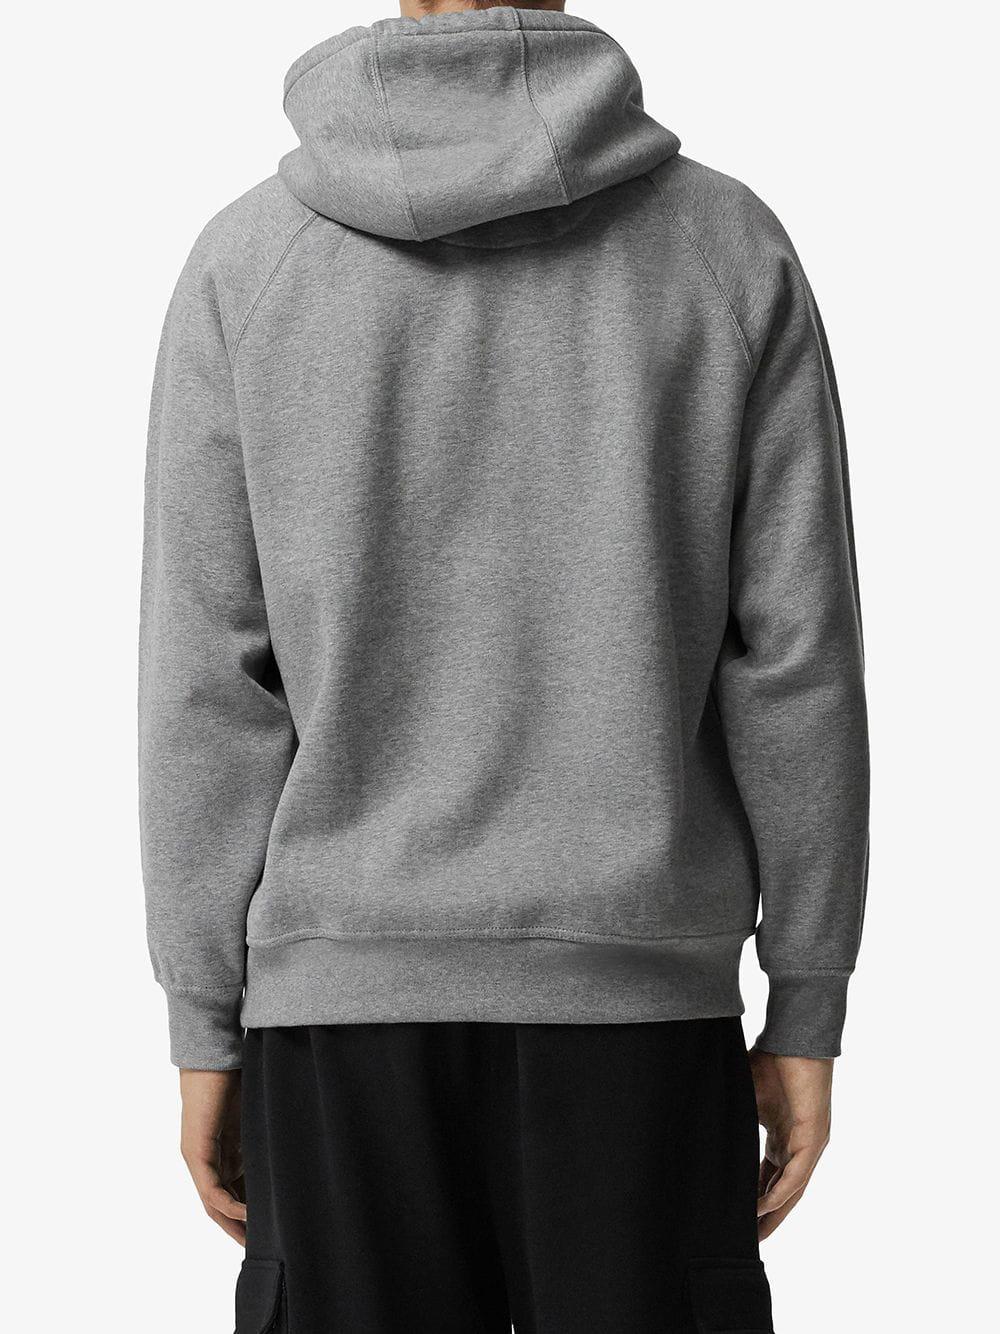 Burberry Embroidered Logo Hoodie in Grey (Gray) for Men - Lyst